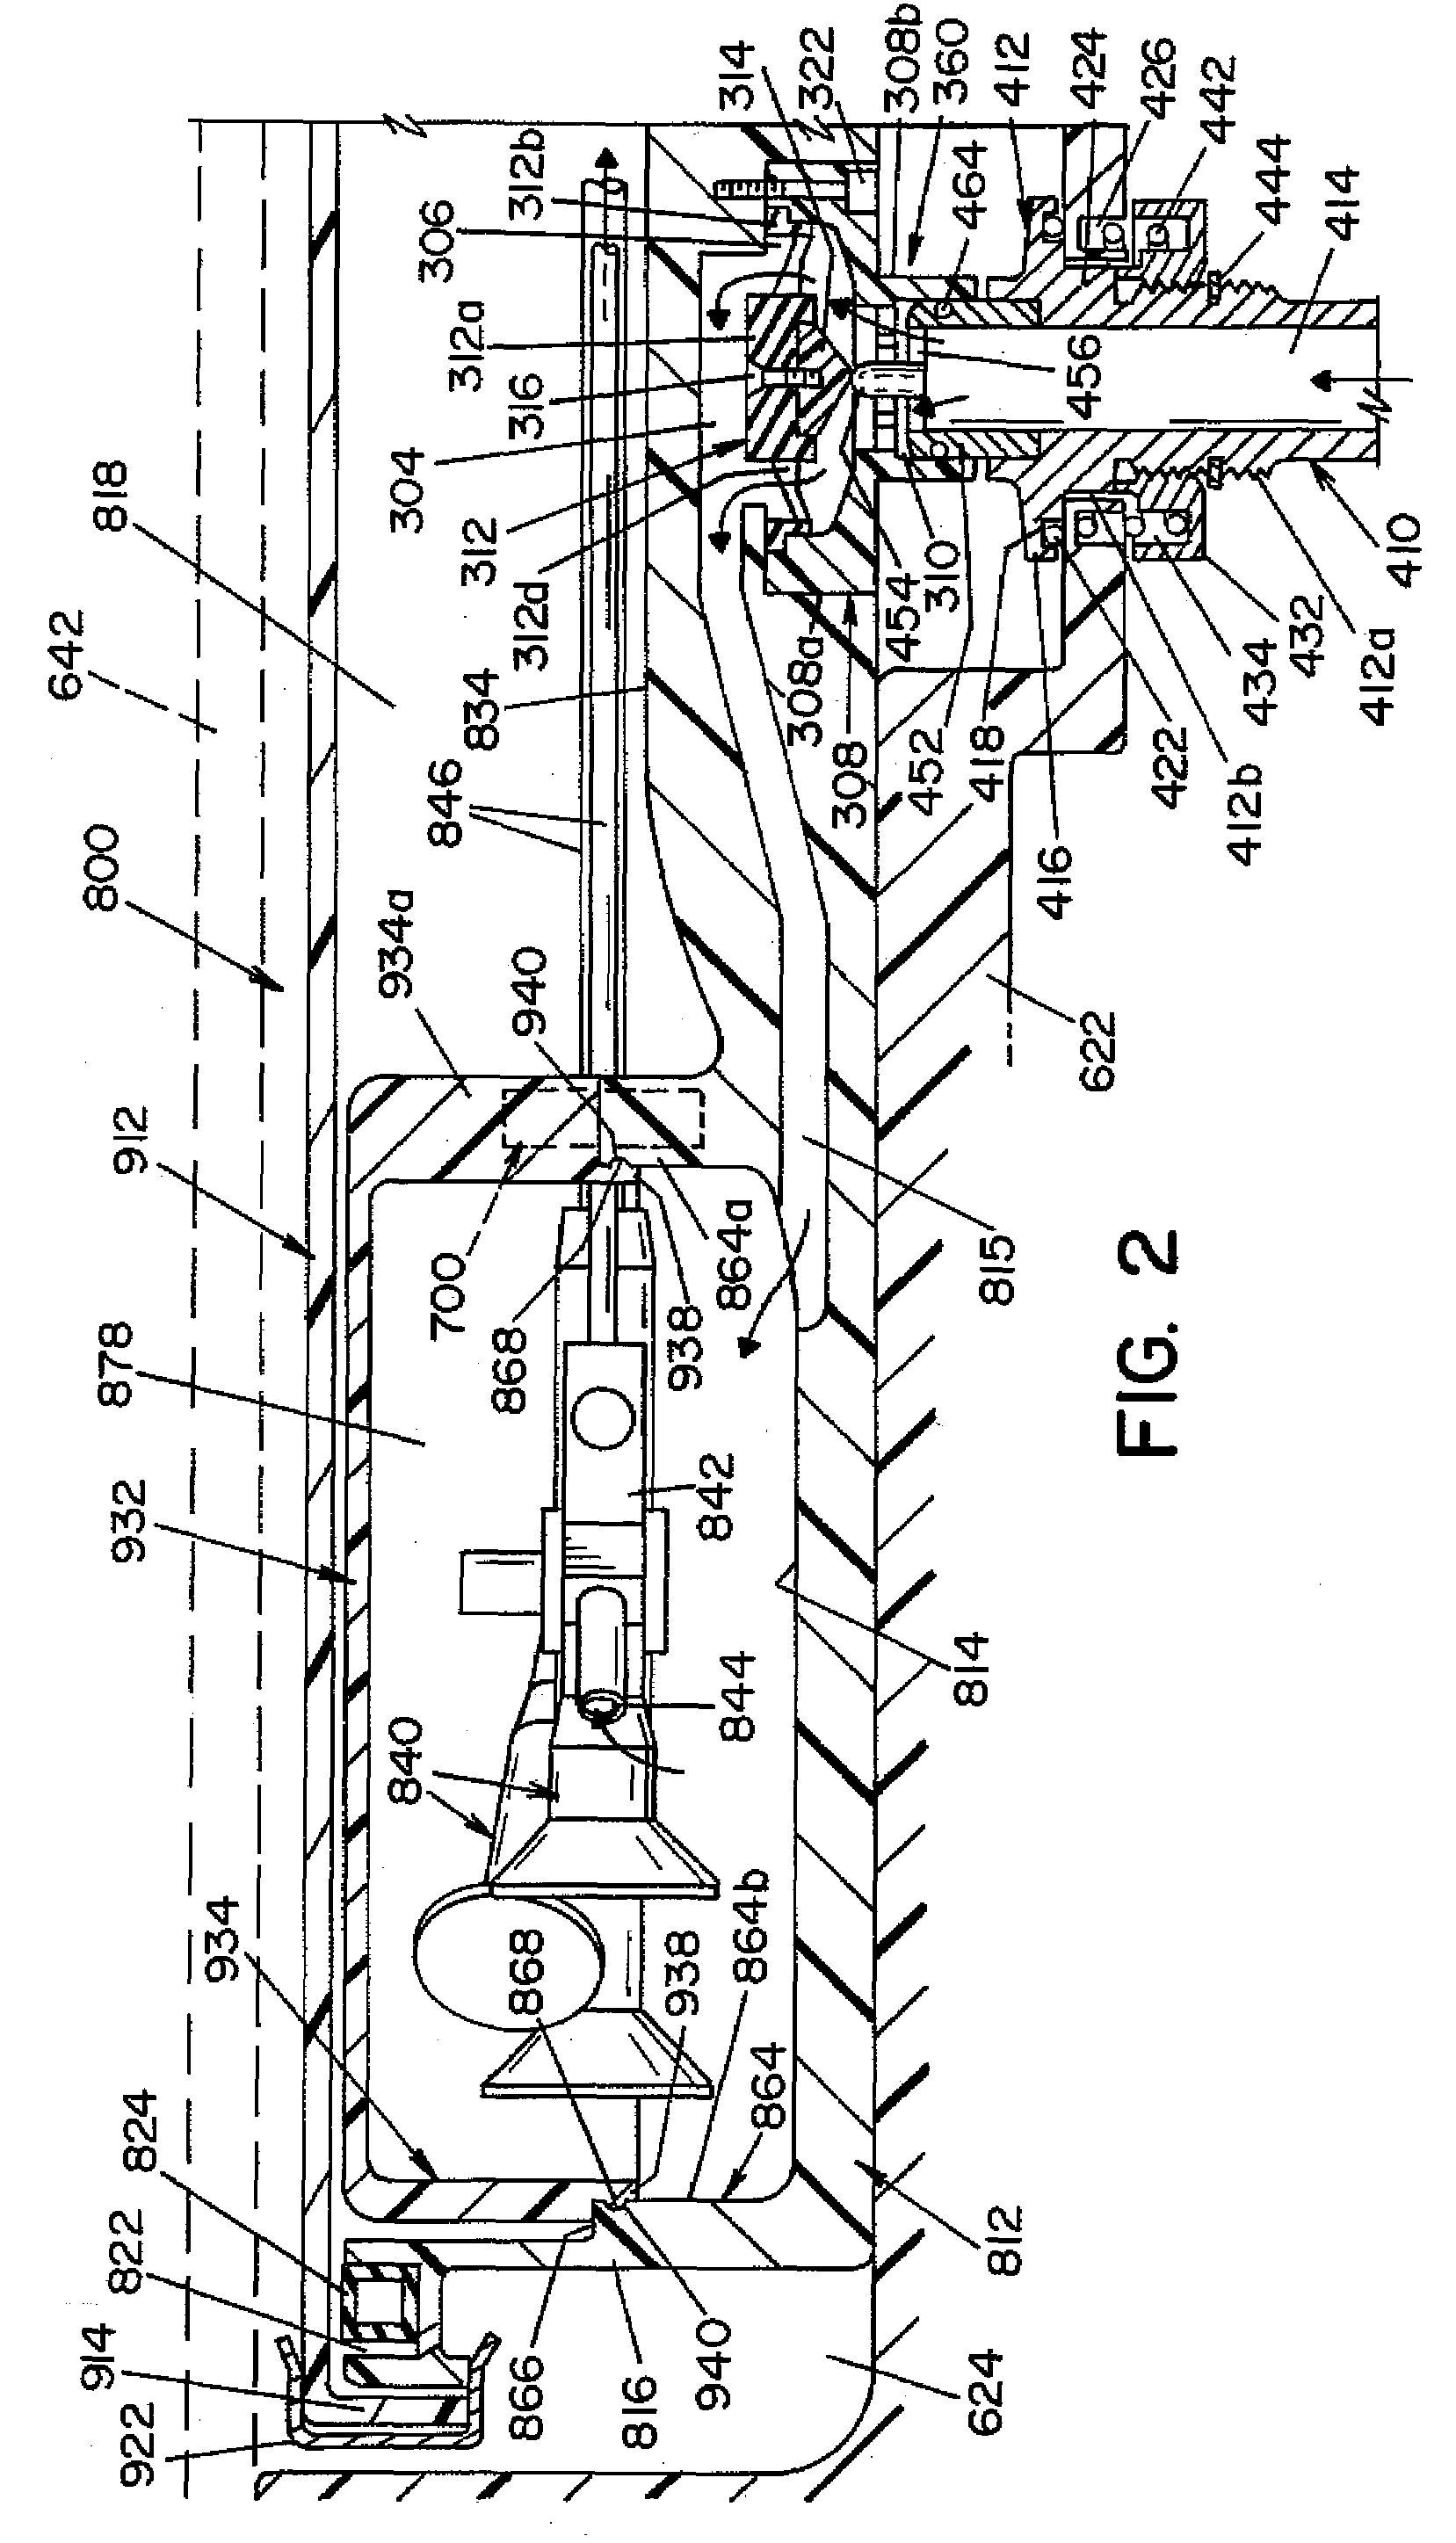 Instrument container having multiple chambers with flow pathways therebetween